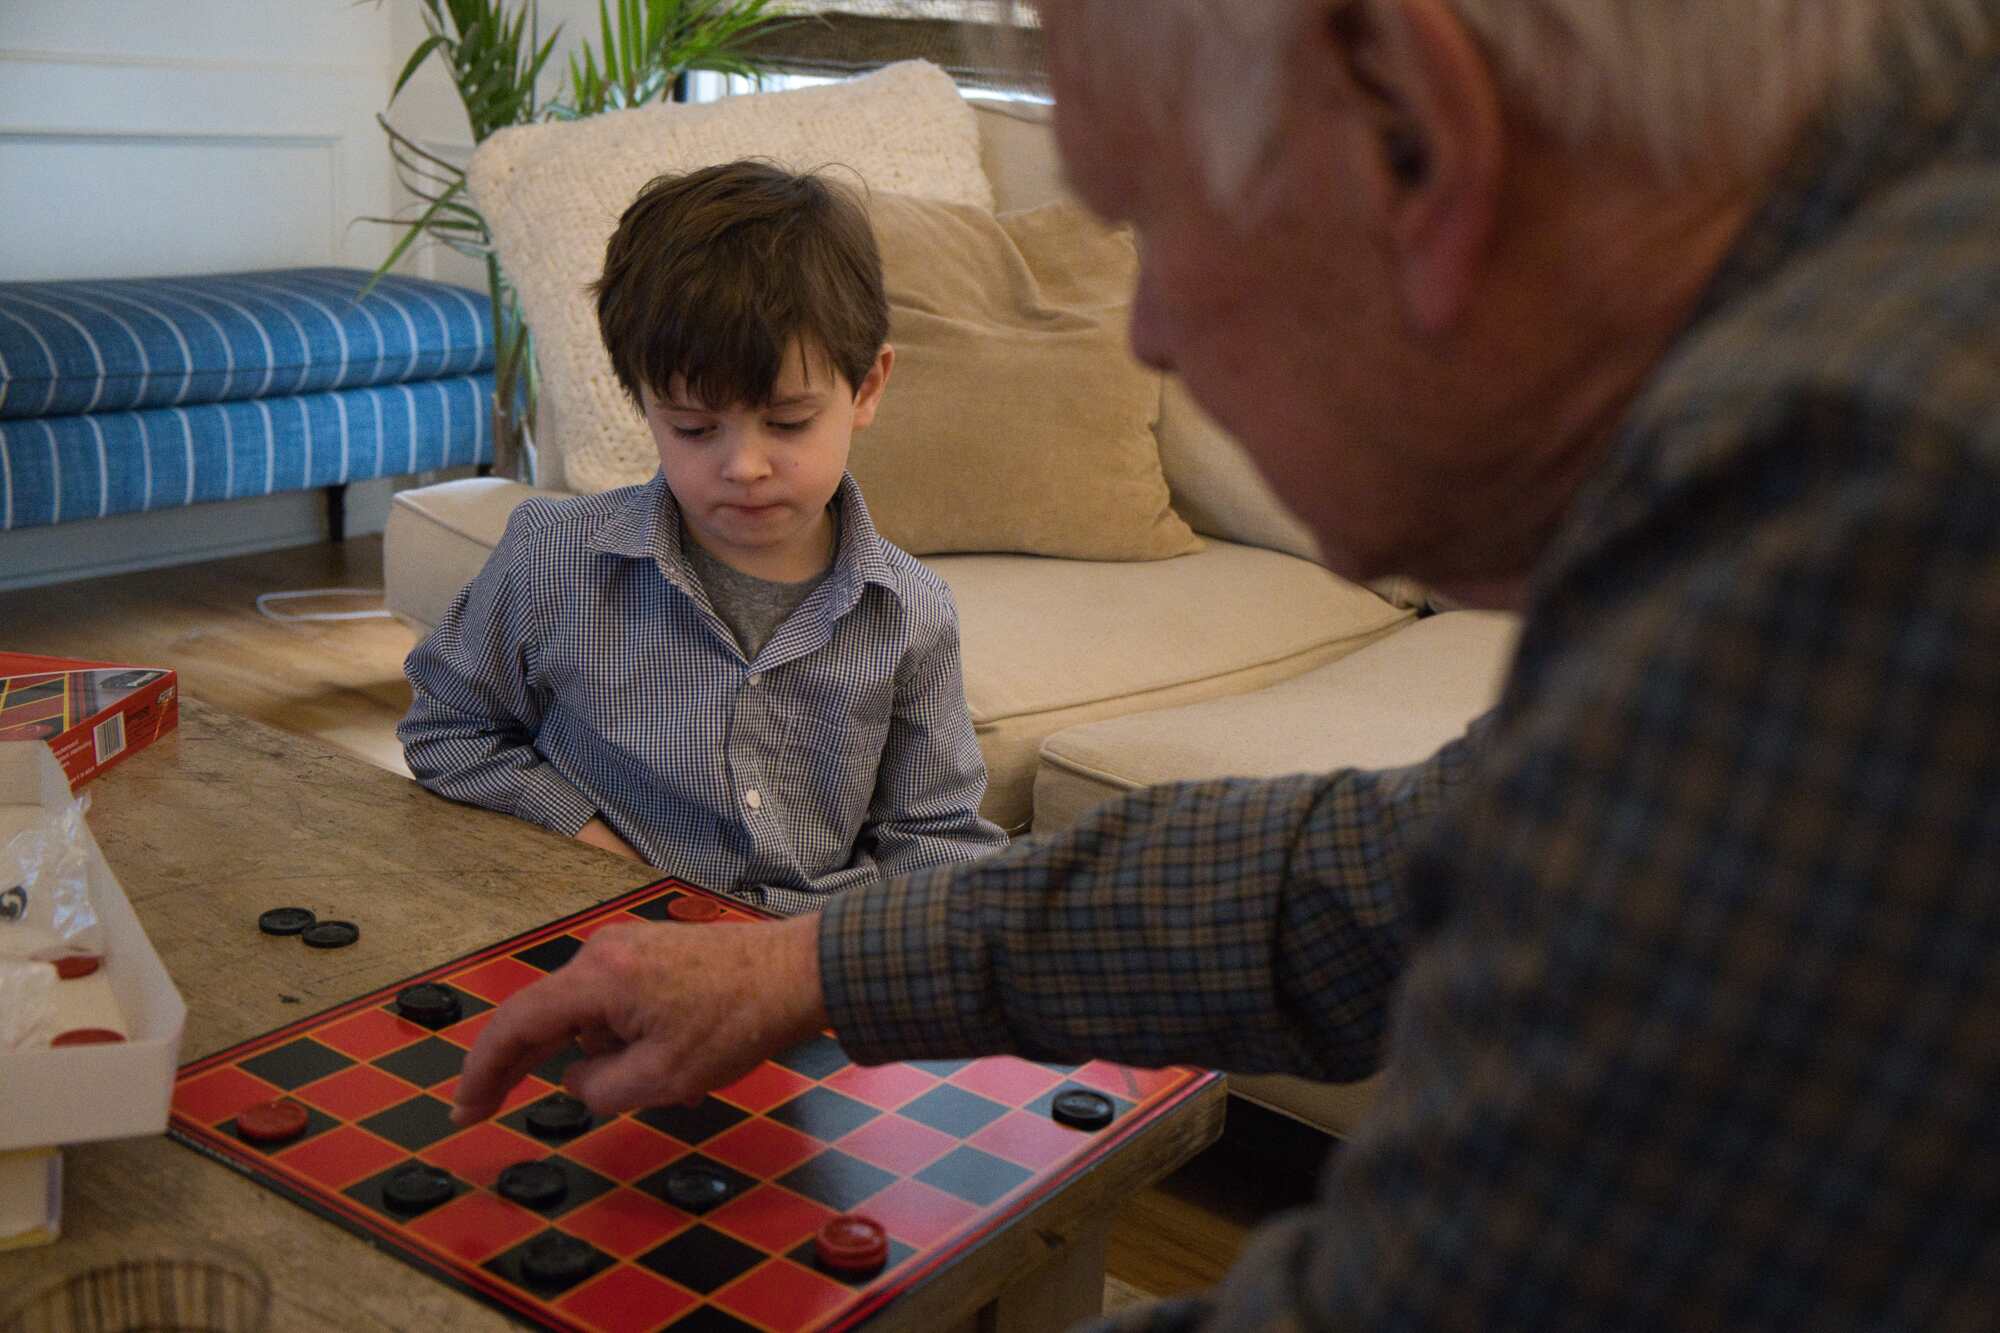 Man and boy playing checkers with no editing.